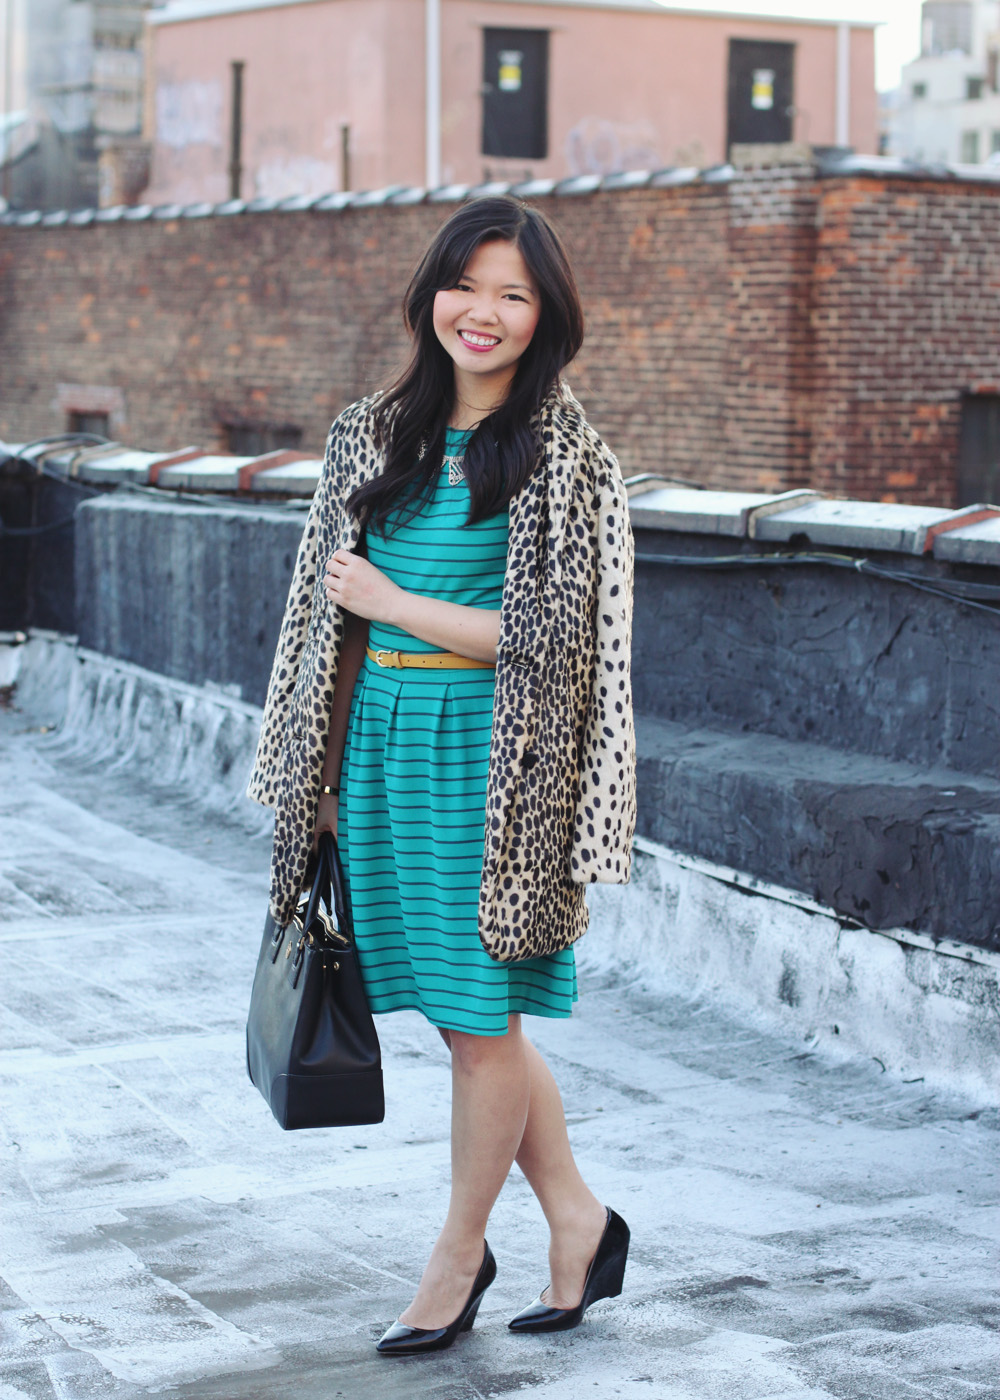 Skirt The Rules Blog; NYC fashion blogger; style blog; spring outfit photo; ASOS leopard coat; Target turquoise black striped dress; JewelMint crystal gold collar necklace; H&M yellow skinny belt; Tory Burch Robinson black tote; C. Wonder skinny initial cuff; Pour La Victoire black wedge pumps